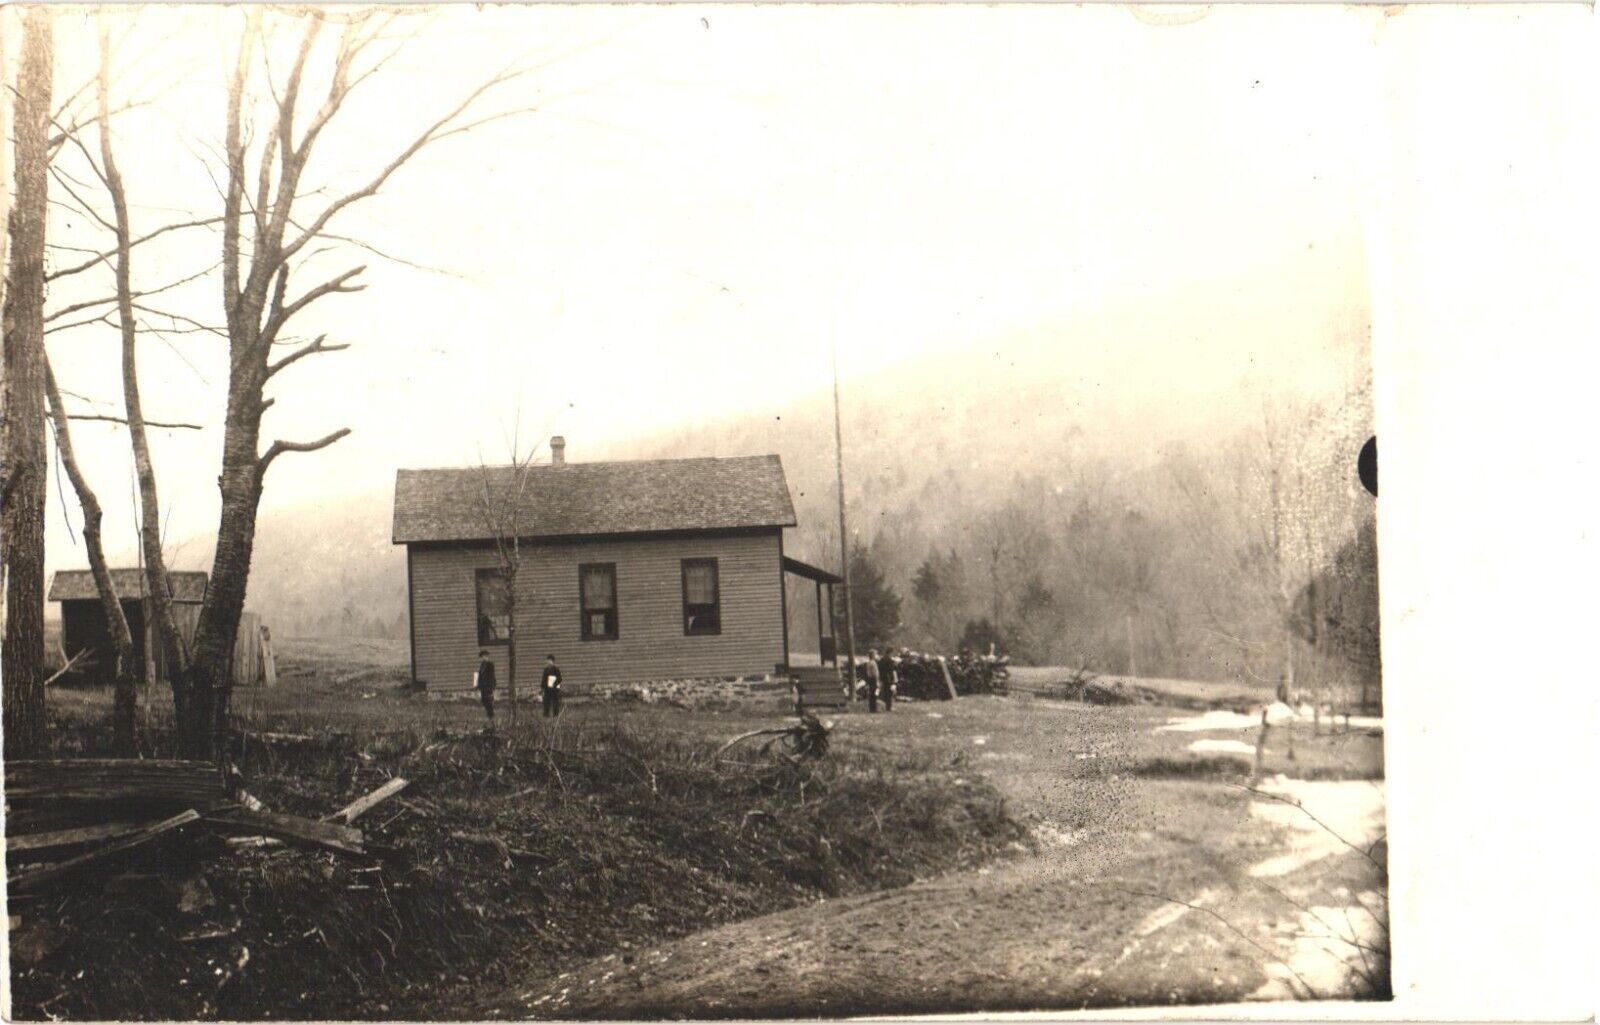 An Old Photograph of Boy Standing By A Small House Postcard